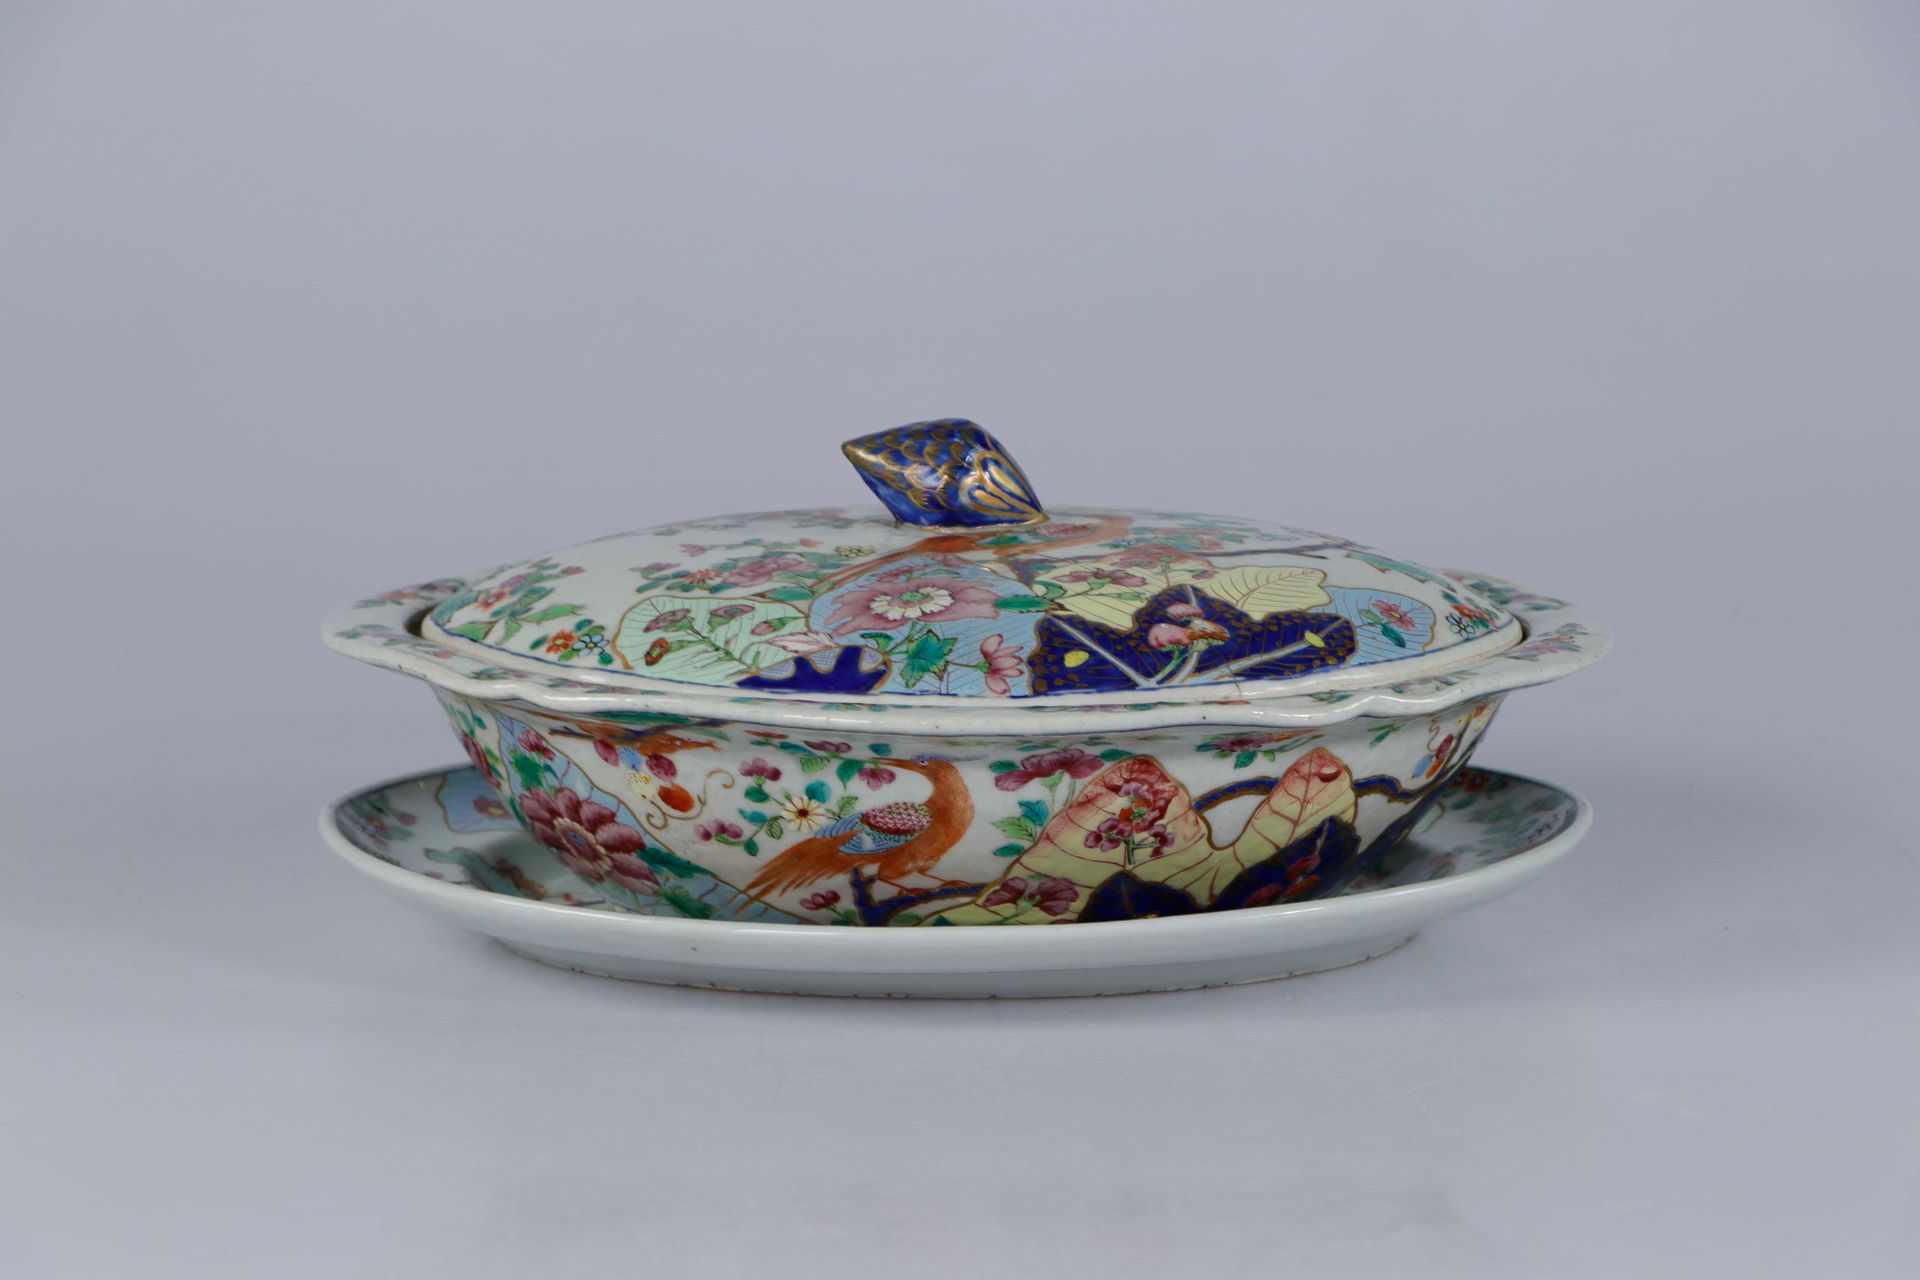 Null *CHINA, Compagnie des Indes, 18th century. Porcelain covered tureen and its&hellip;